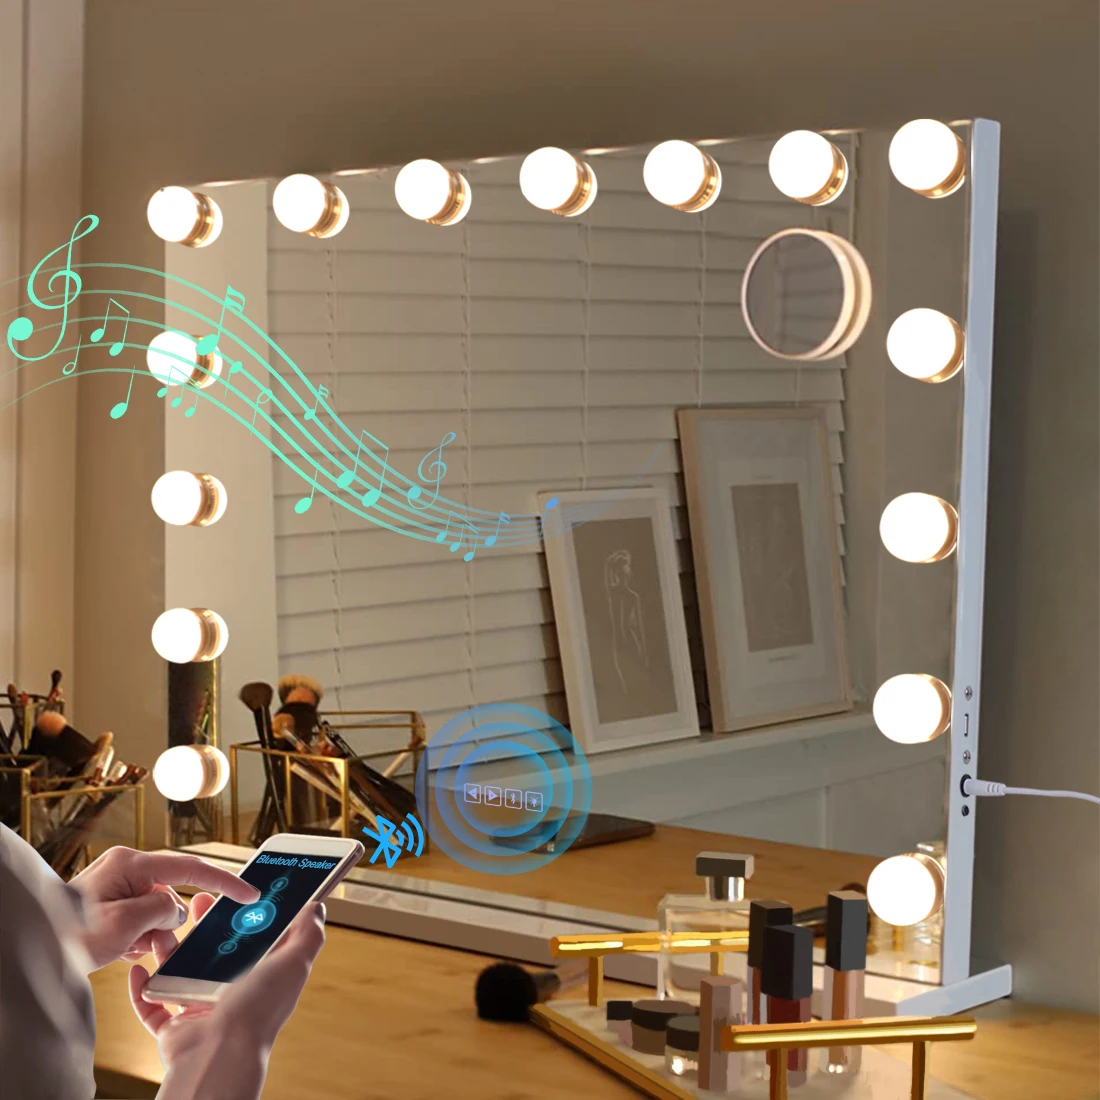 50 x 43cm Puselo Large Hollywood Vanity Mirror Smart Touch Control Makeup Mirror with 14 LED Lights 